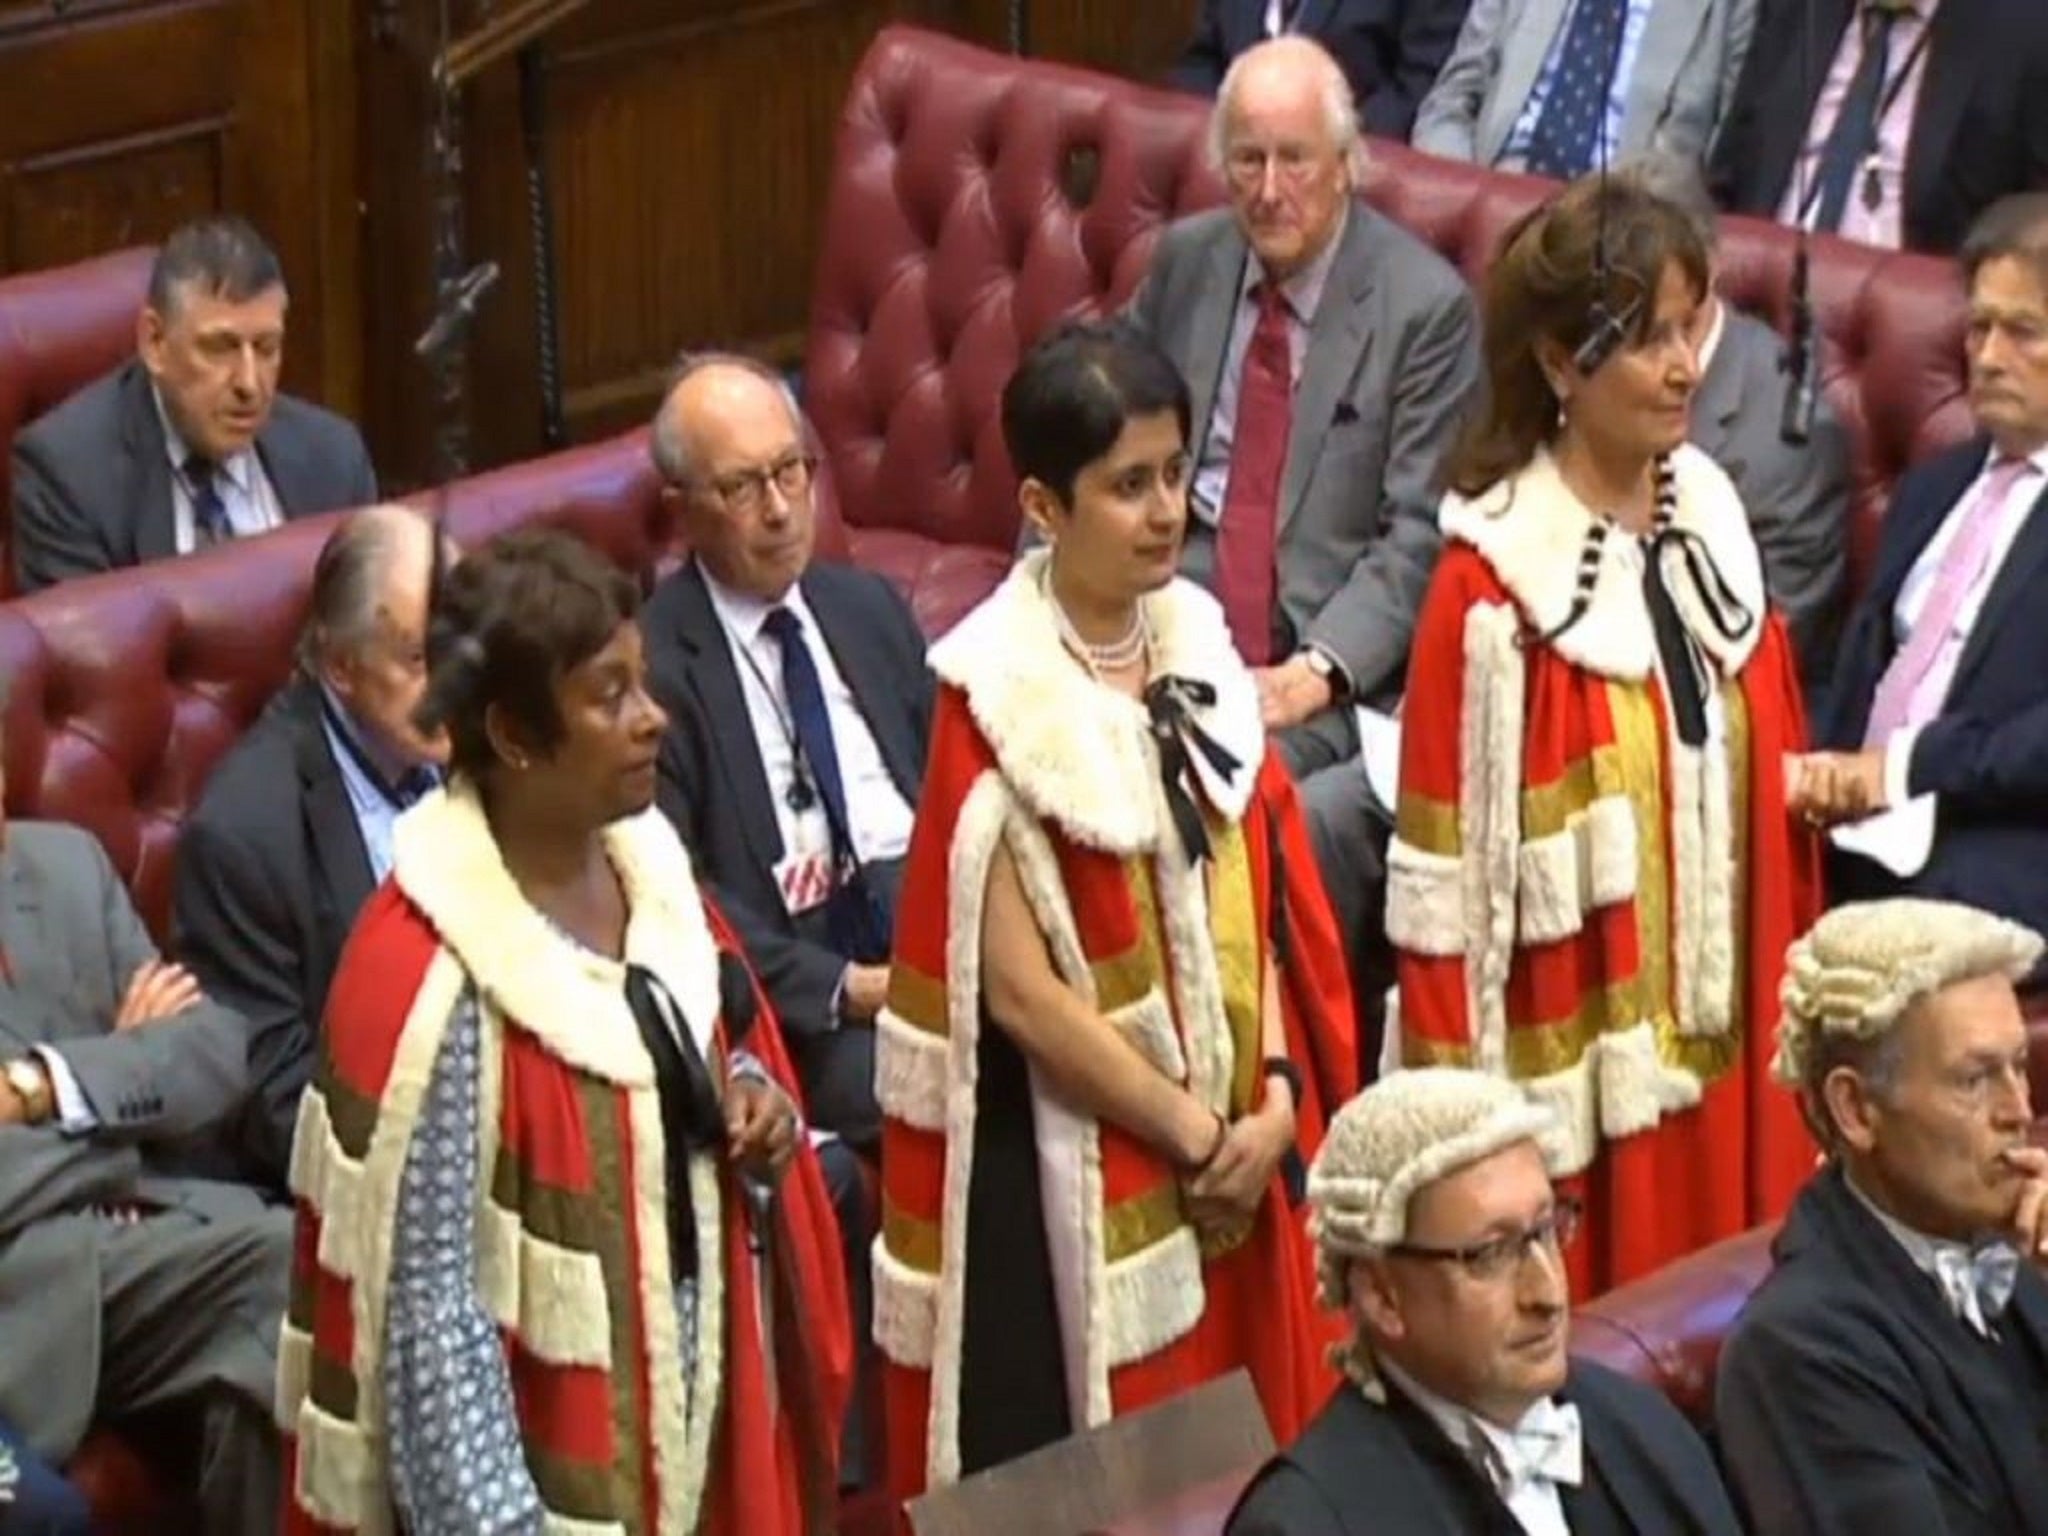 Shami Chakrabarti receiving her peerage in September 2016 in the House of Lords parliamentlive/screengrab